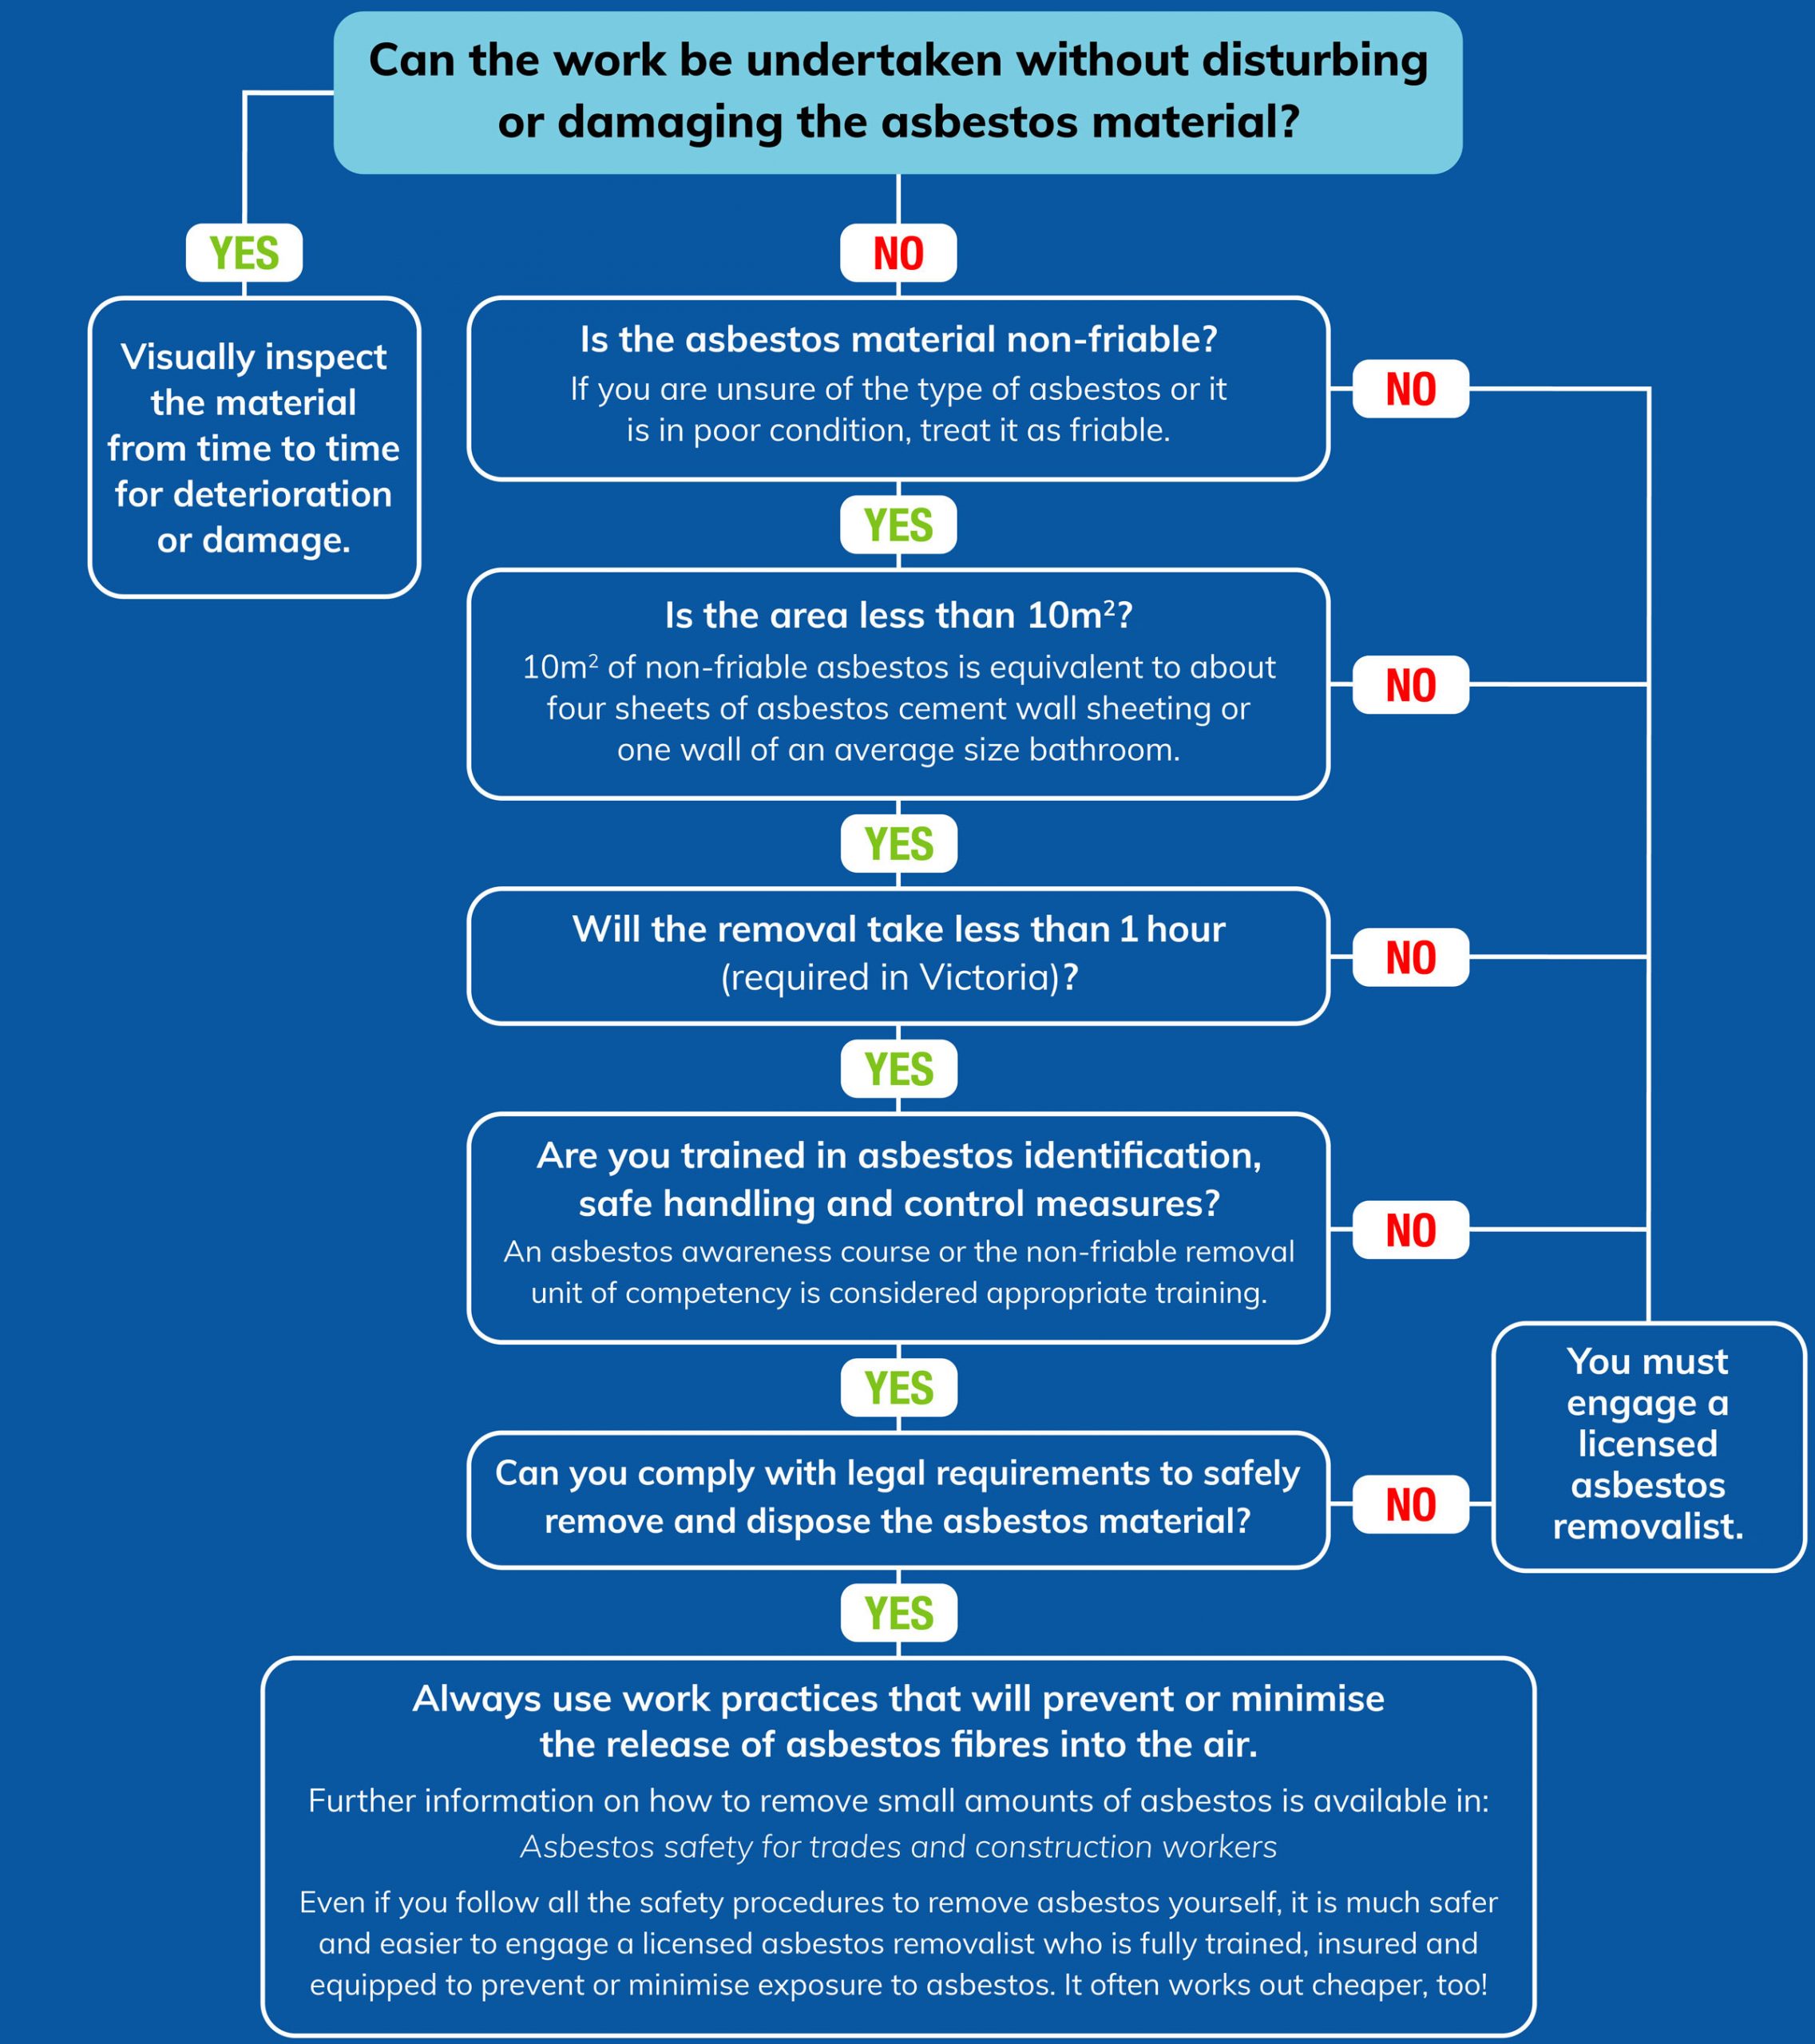 Flowchart to determine if work can be undertaken without damaging or disturbing the asbestos material